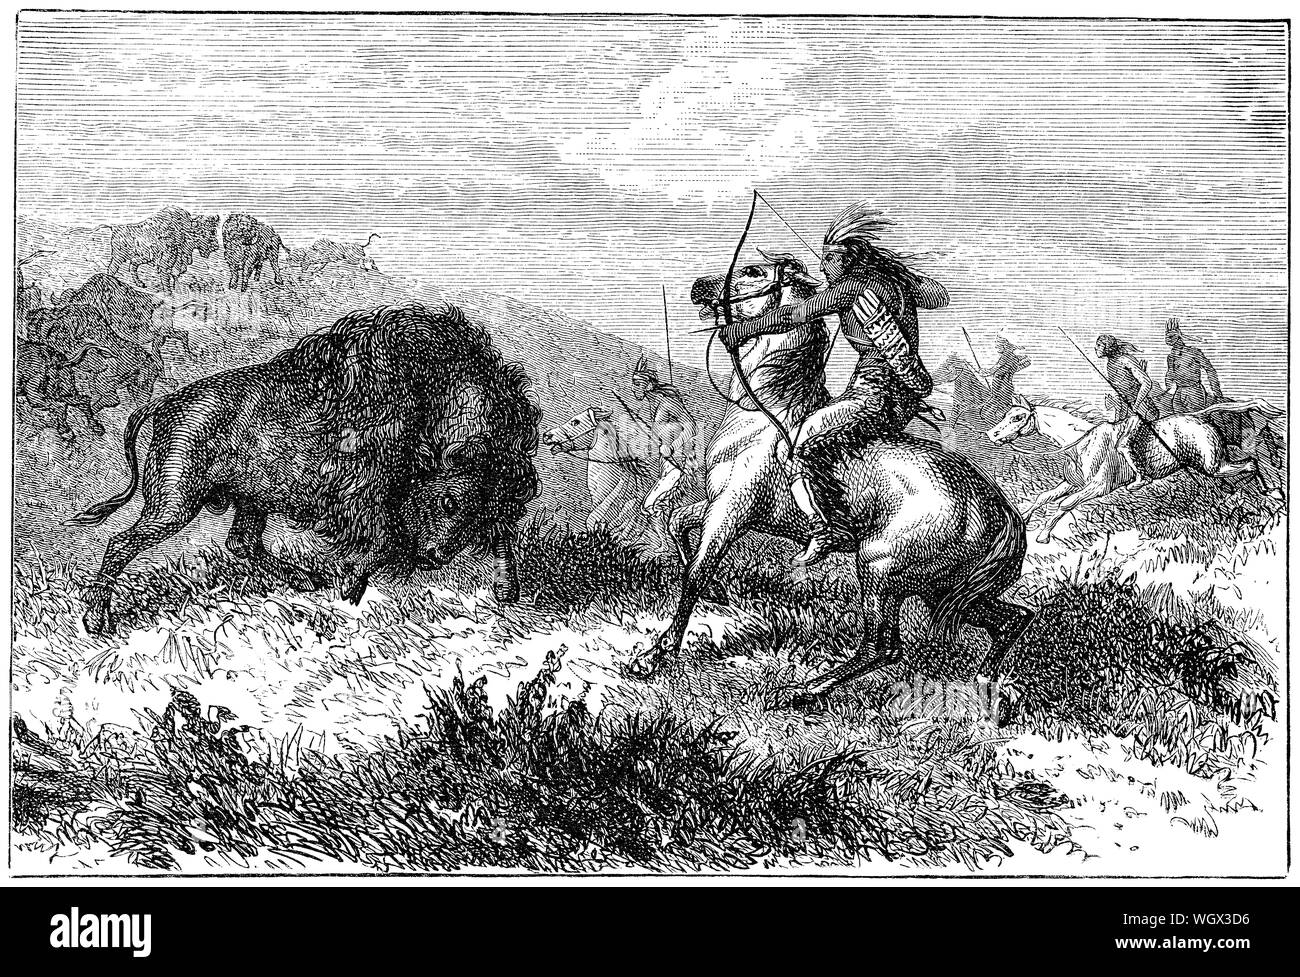 c1876 engraving of Native Americans hunting bison. Stock Photo